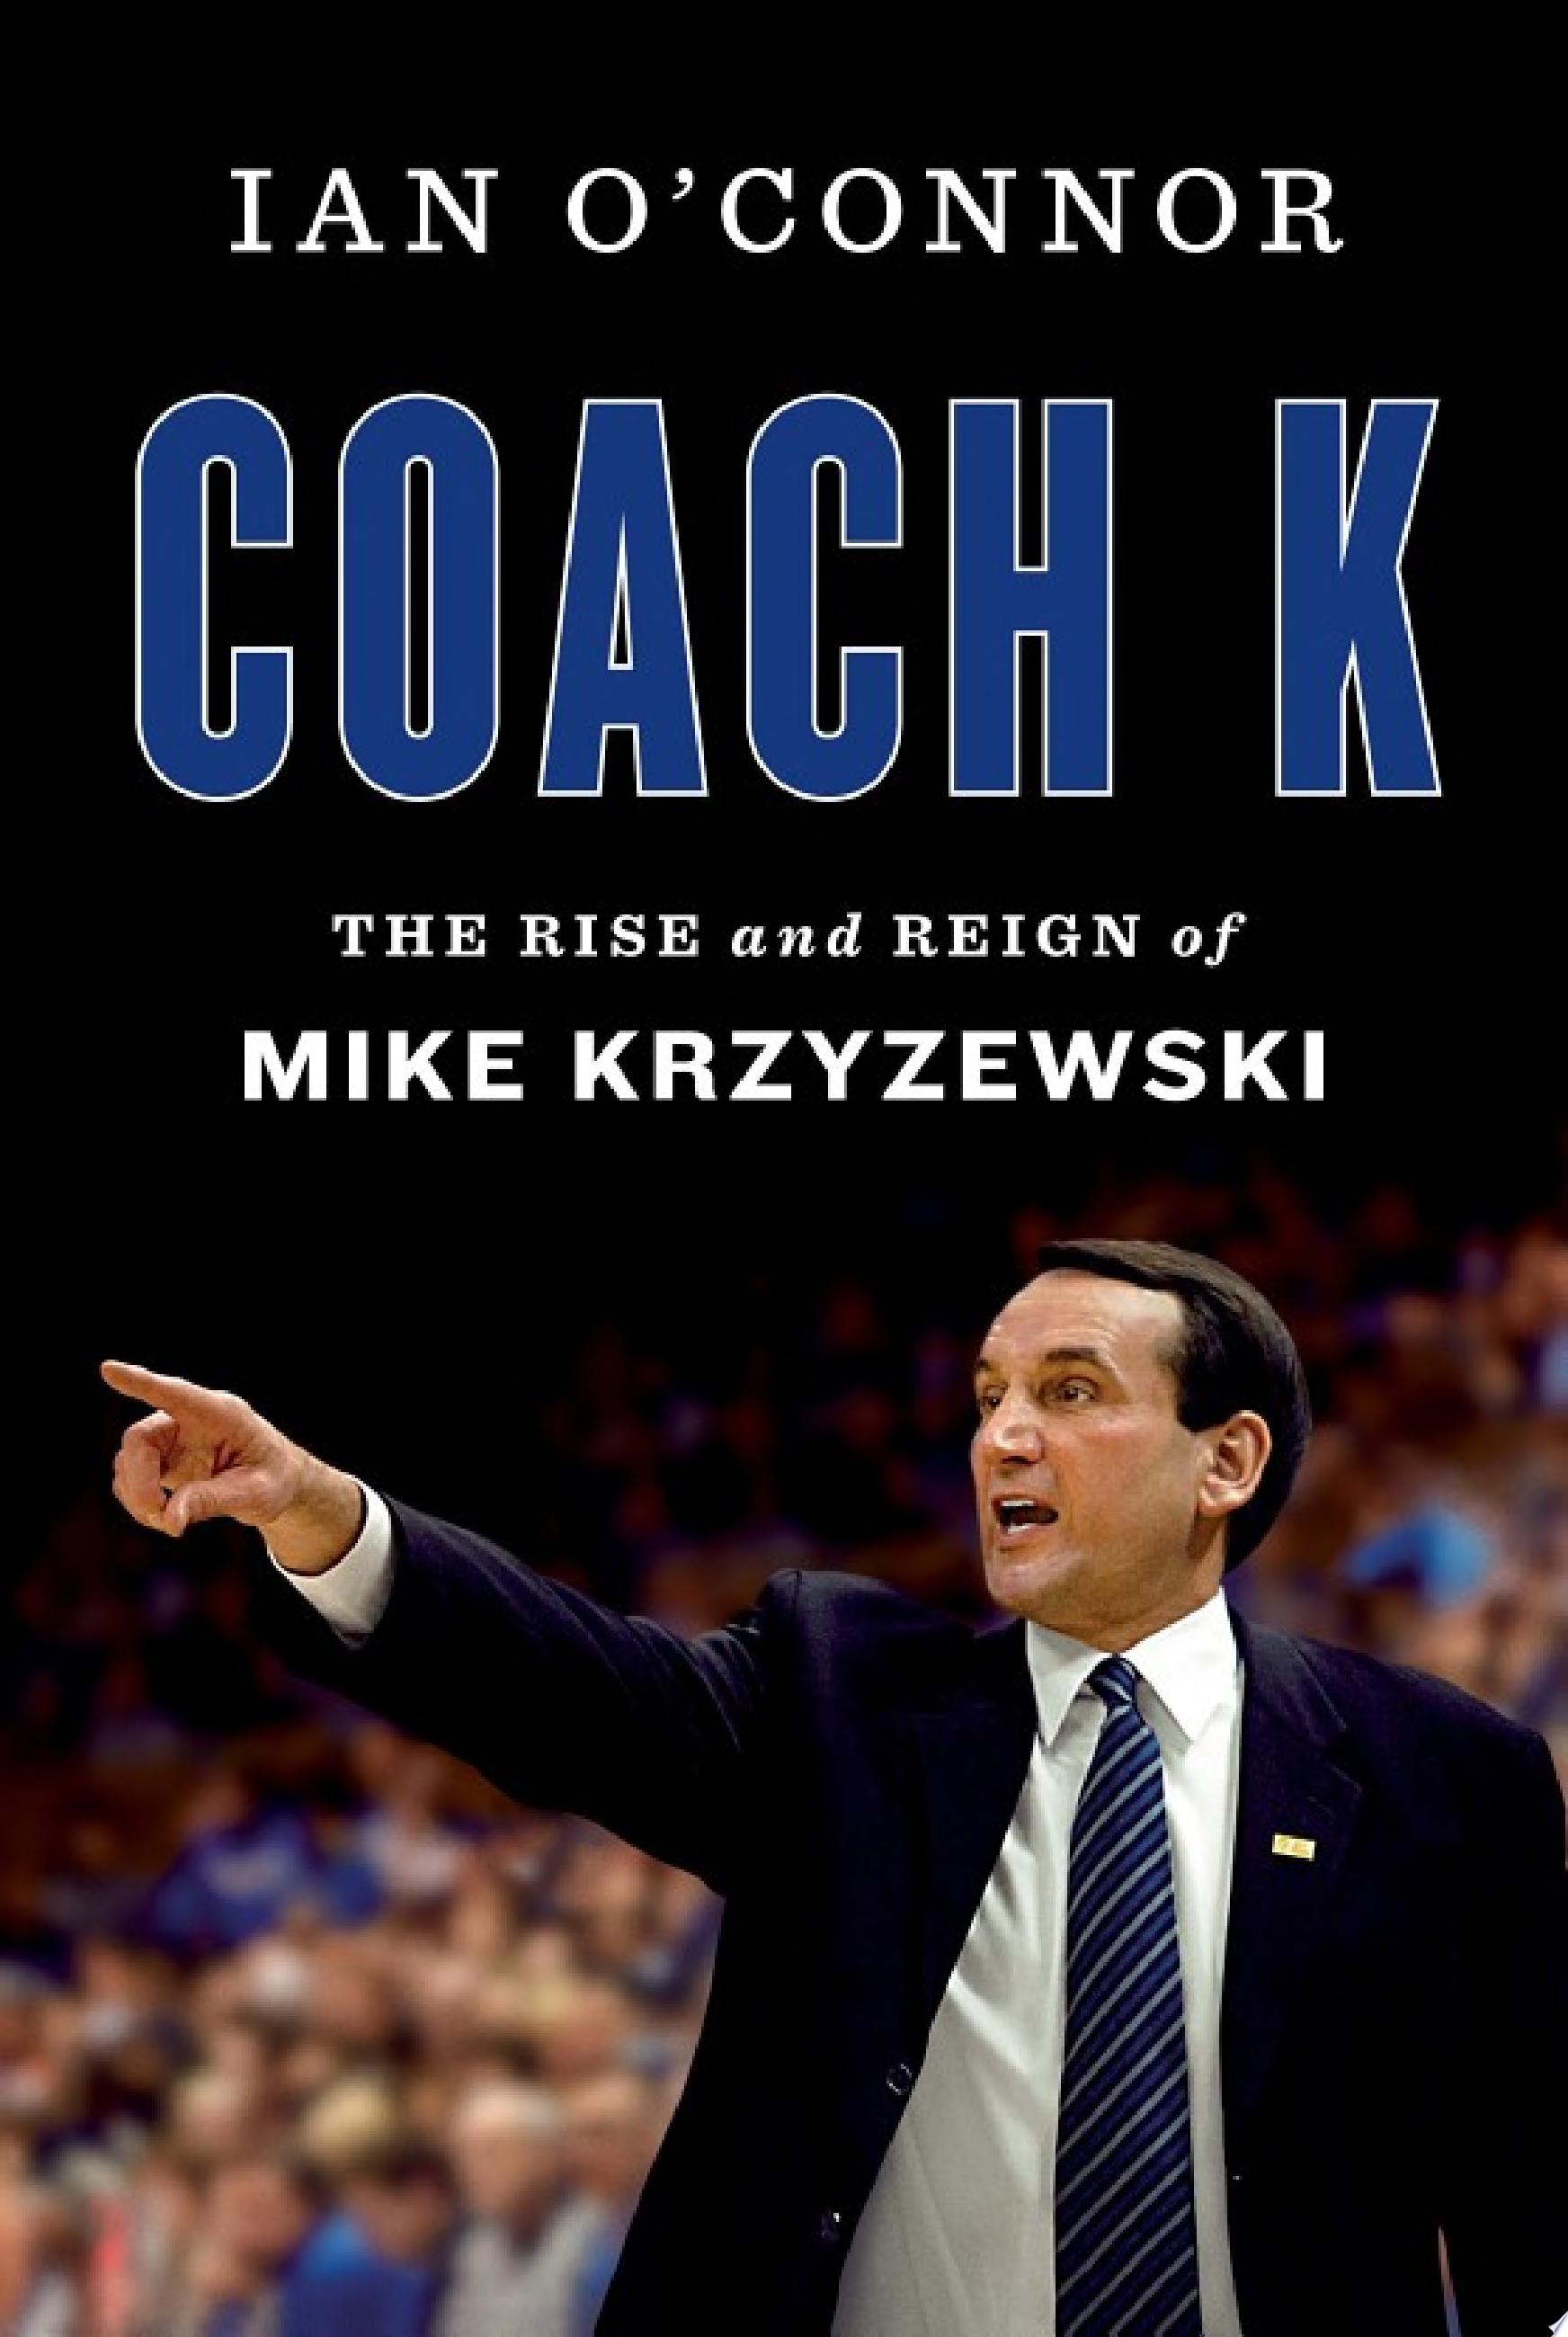 Image for "Coach K"